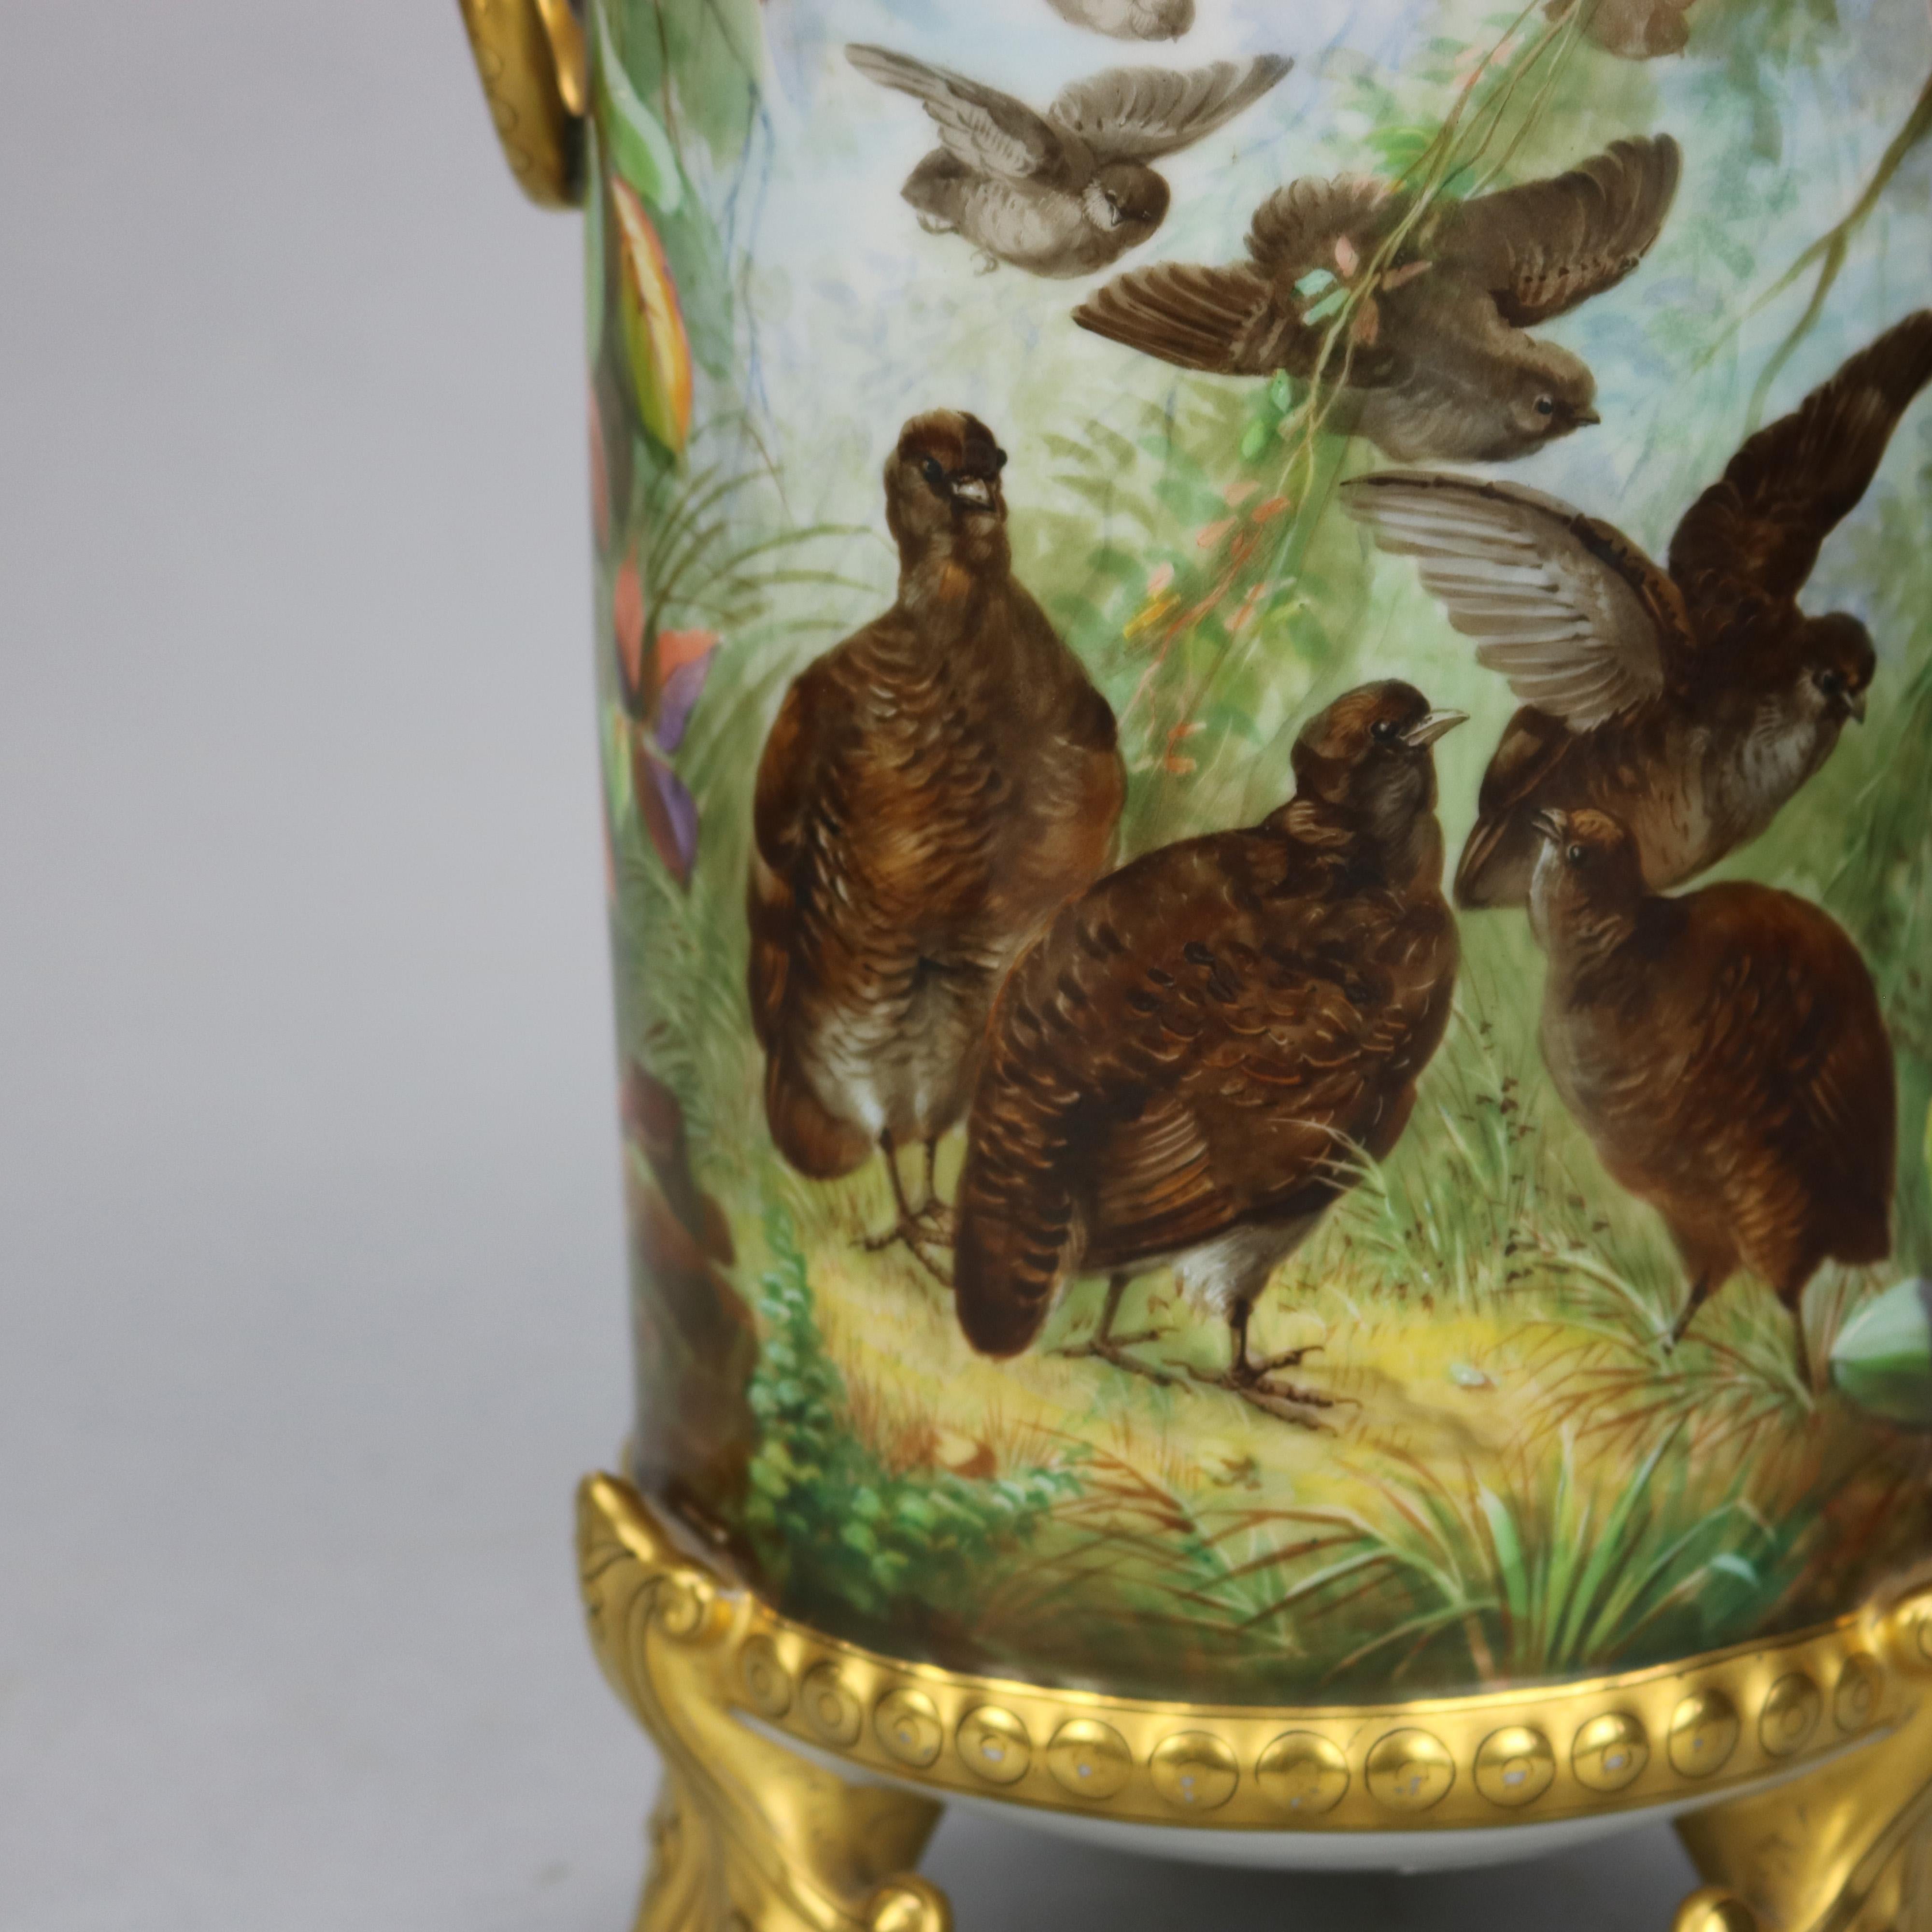 An antique French Haviland Limoges porcelain vase offers cylinder form with hand painted marsh or wetland scene having game birds including quail, upper pierced and gilt collar, double handles and foliate form feet, circa 1890

Measures: 14.5